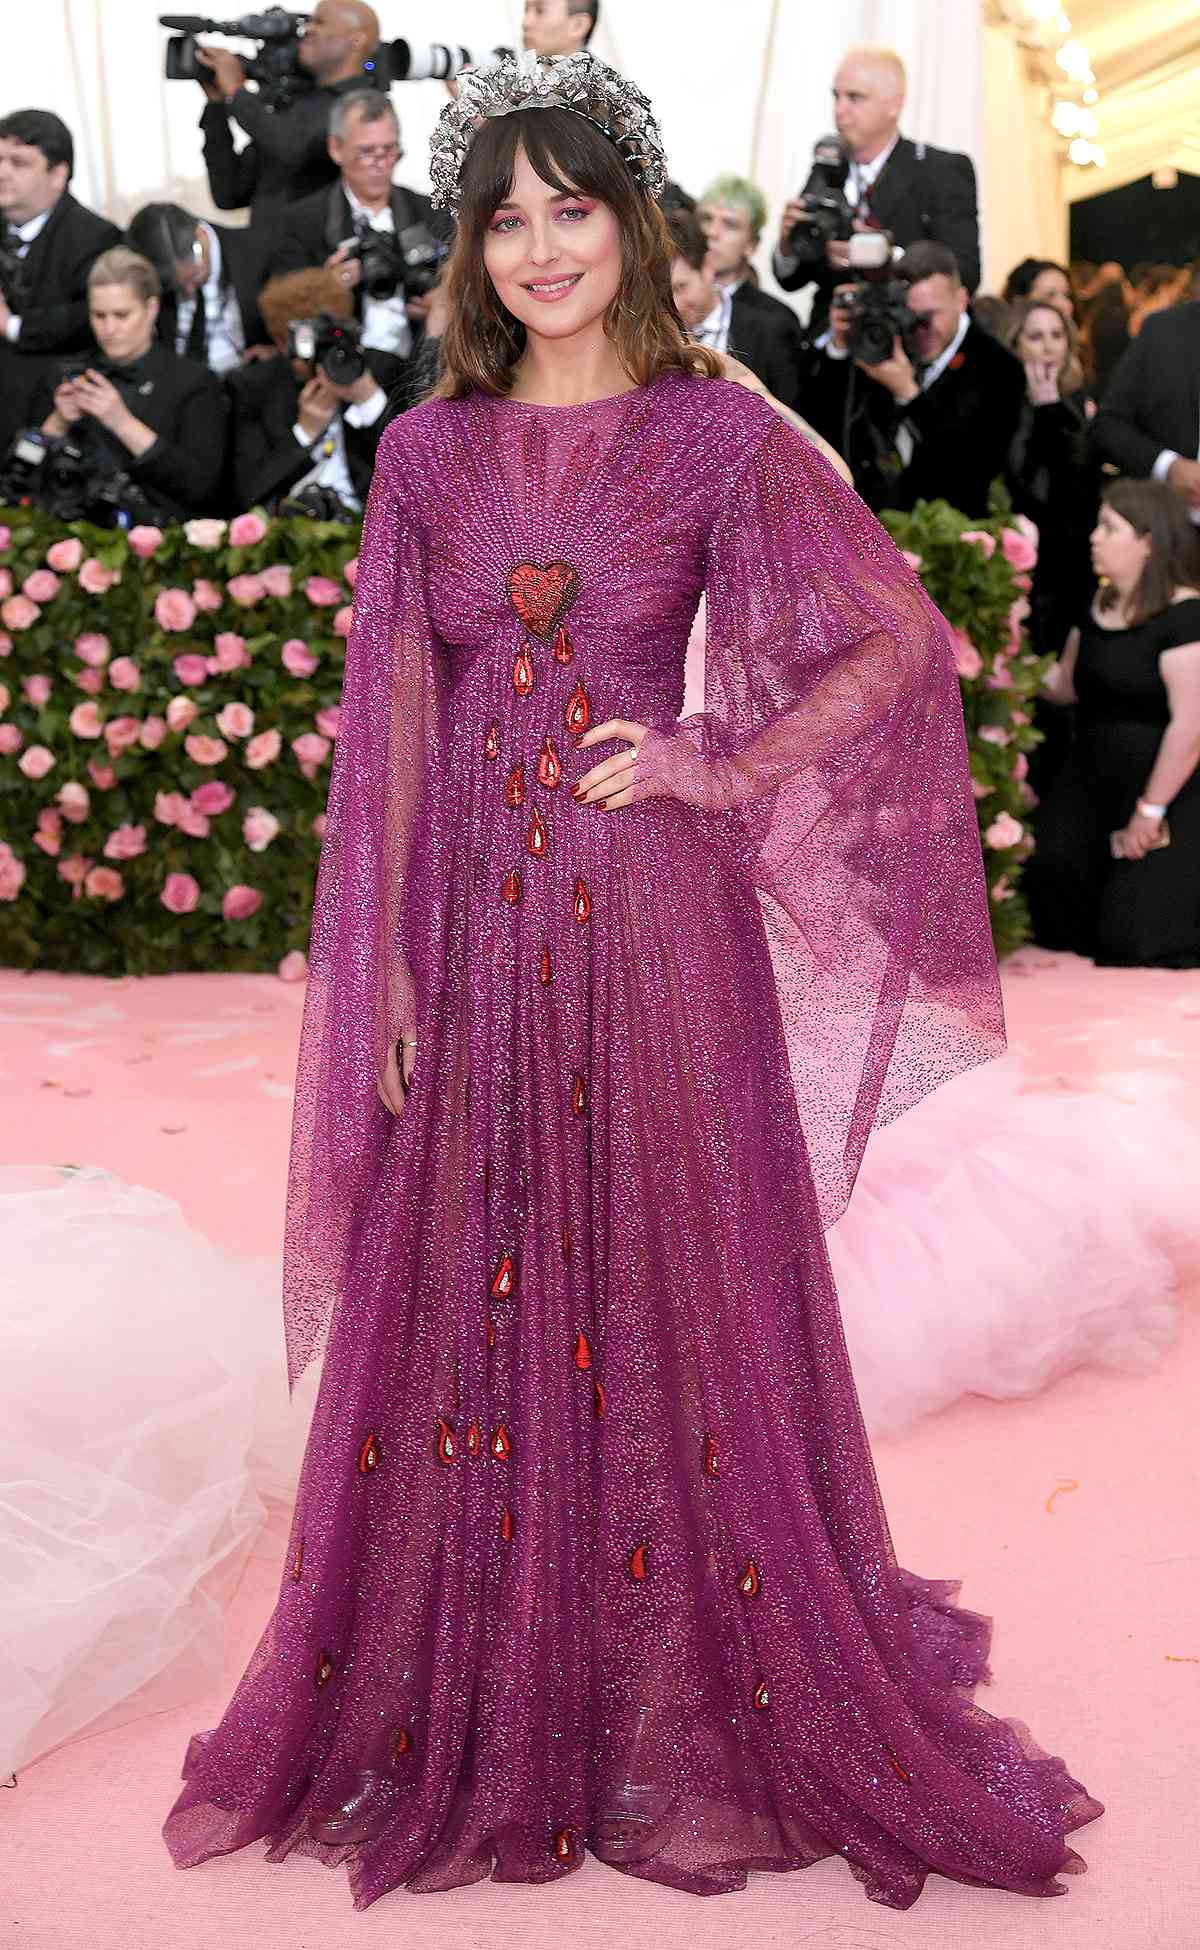 NEW YORK, NEW YORK - MAY 06: Dakota Johnson attends The 2019 Met Gala Celebrating Camp: Notes on Fashion at Metropolitan Museum of Art on May 06, 2019 in New York City. (Photo by Neilson Barnard/Getty Images)